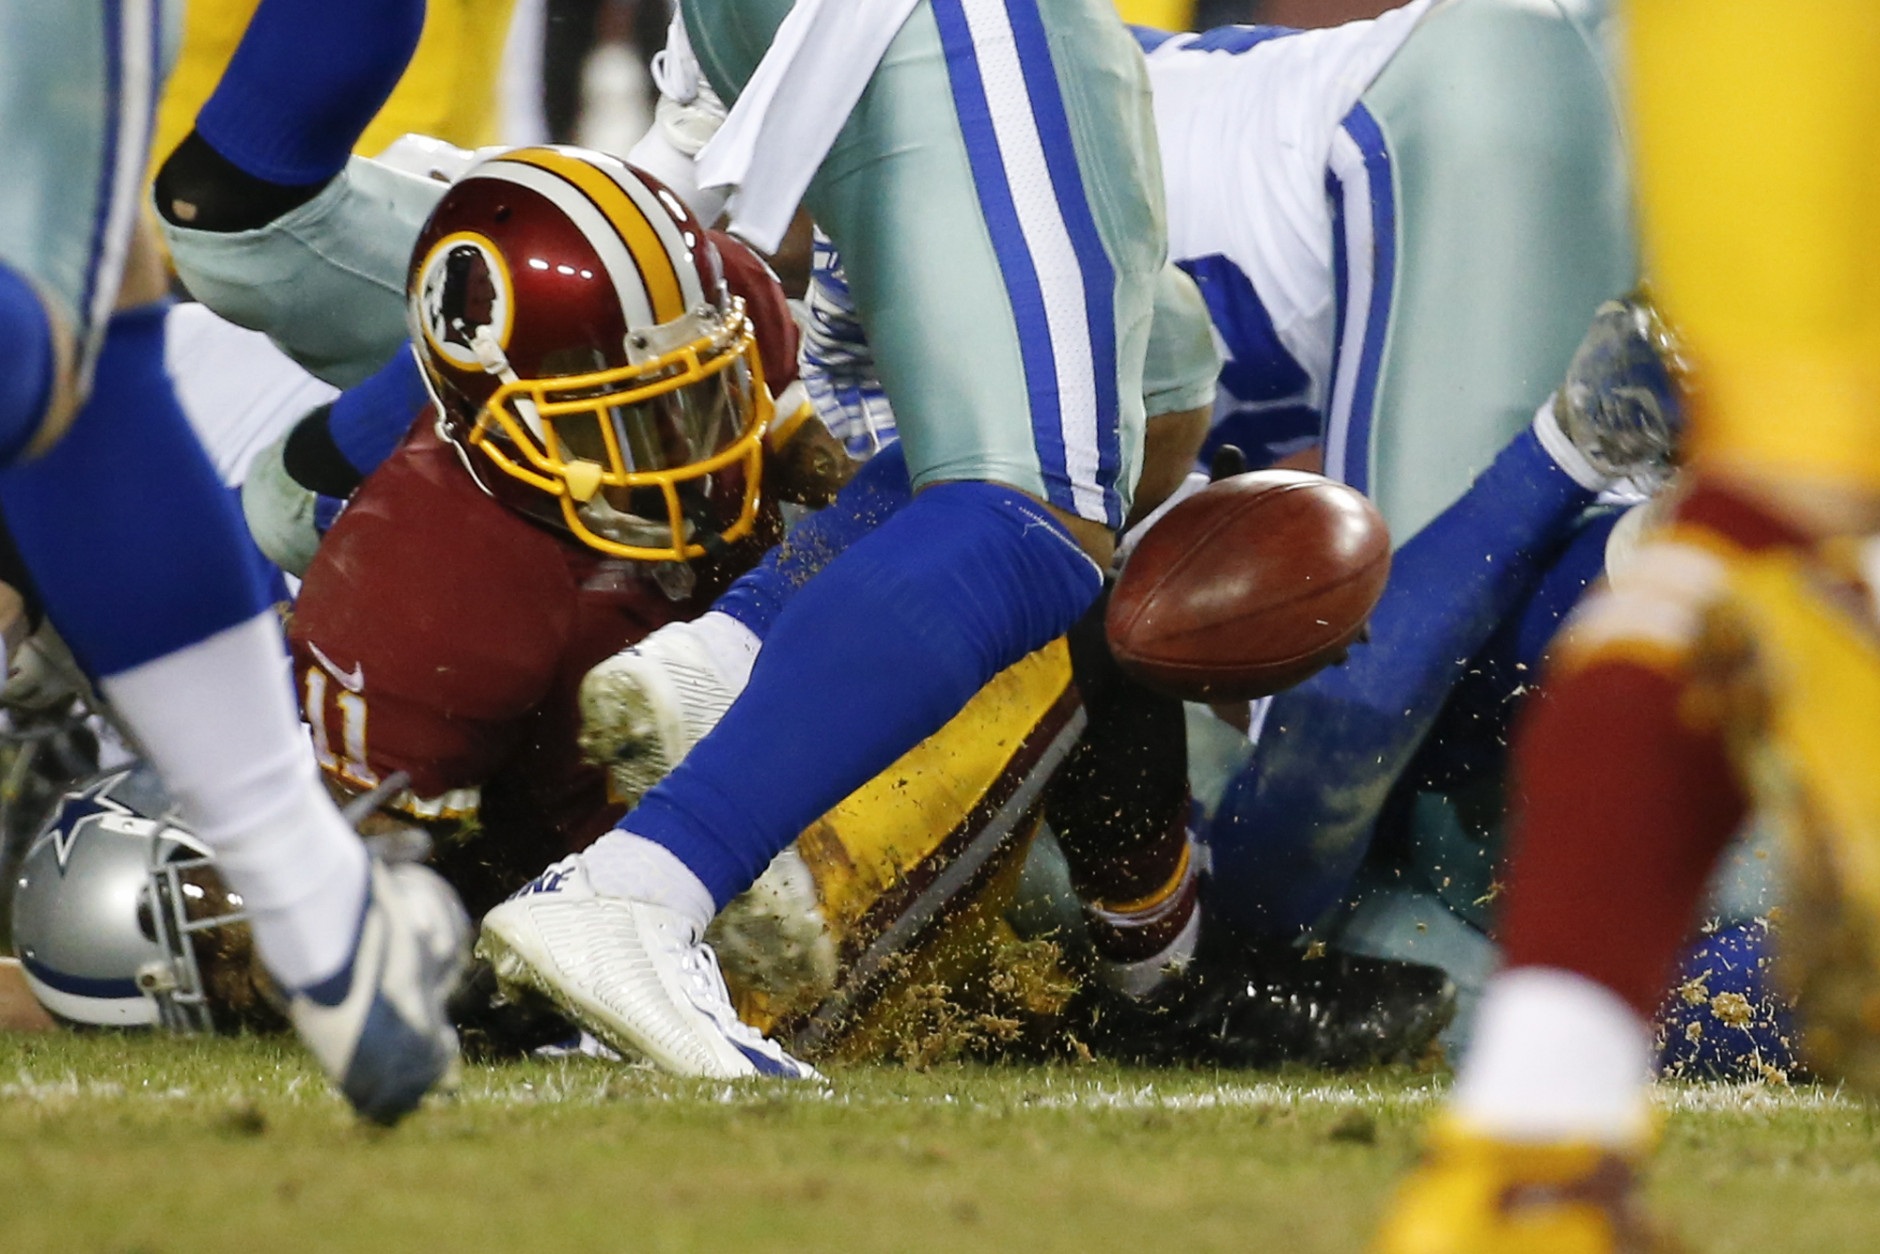 Washington Redskins wide receiver DeSean Jackson (11) fumbles the ball on a kickoff return setting up a Dallas Cowboys touchdown during the second half of an NFL football game in Landover, Md., Monday, Dec. 7, 2015. The Cowboys defeated the Redskins 19-16. (AP Photo/Alex Brandon)